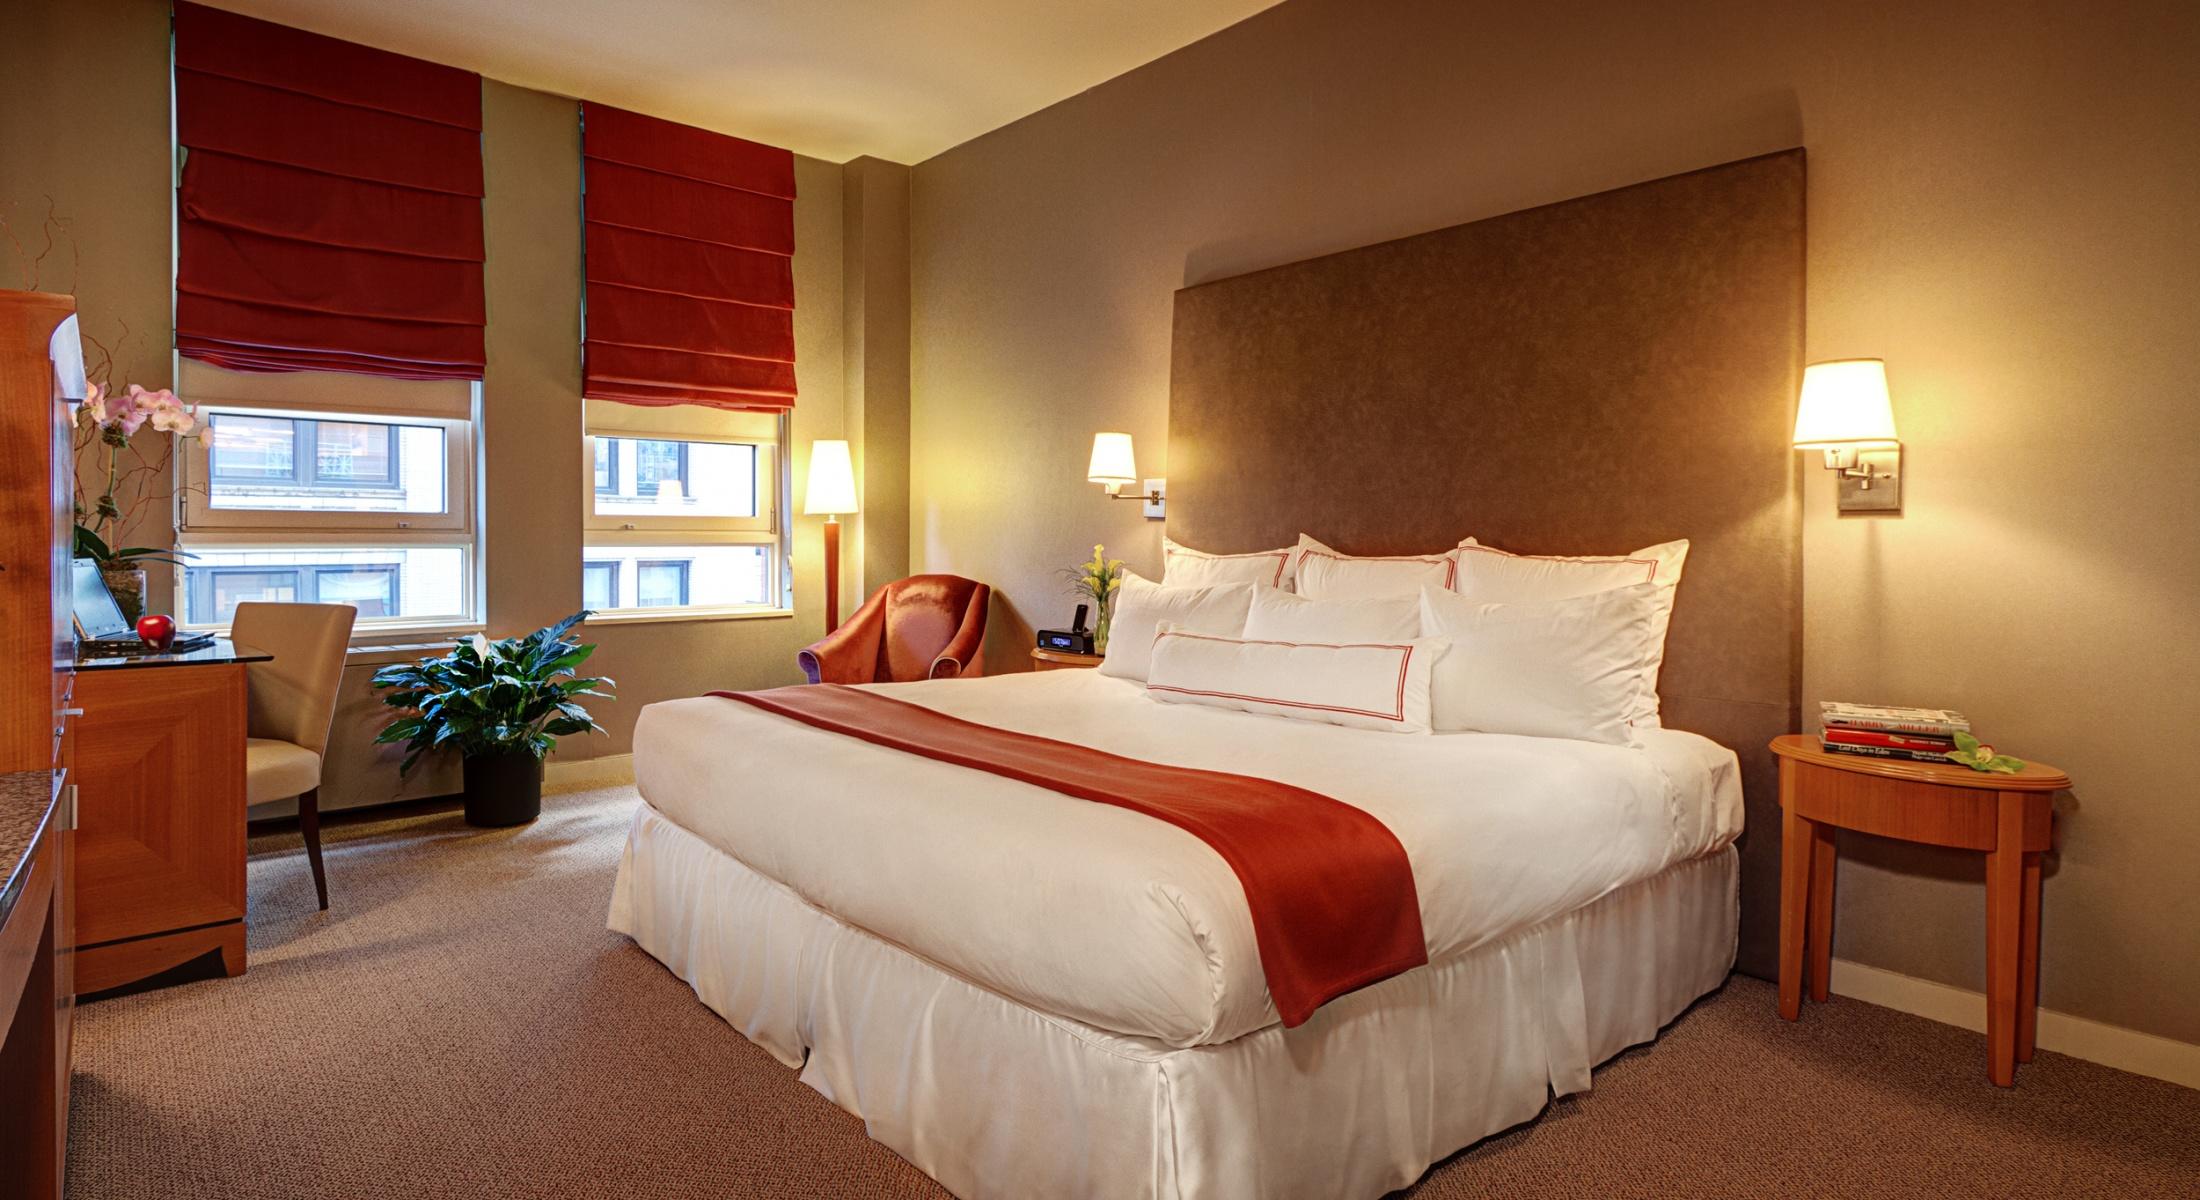 Our Classic King Guestroom is 325 Square Feet and offers a small desk space for those traveling for business.